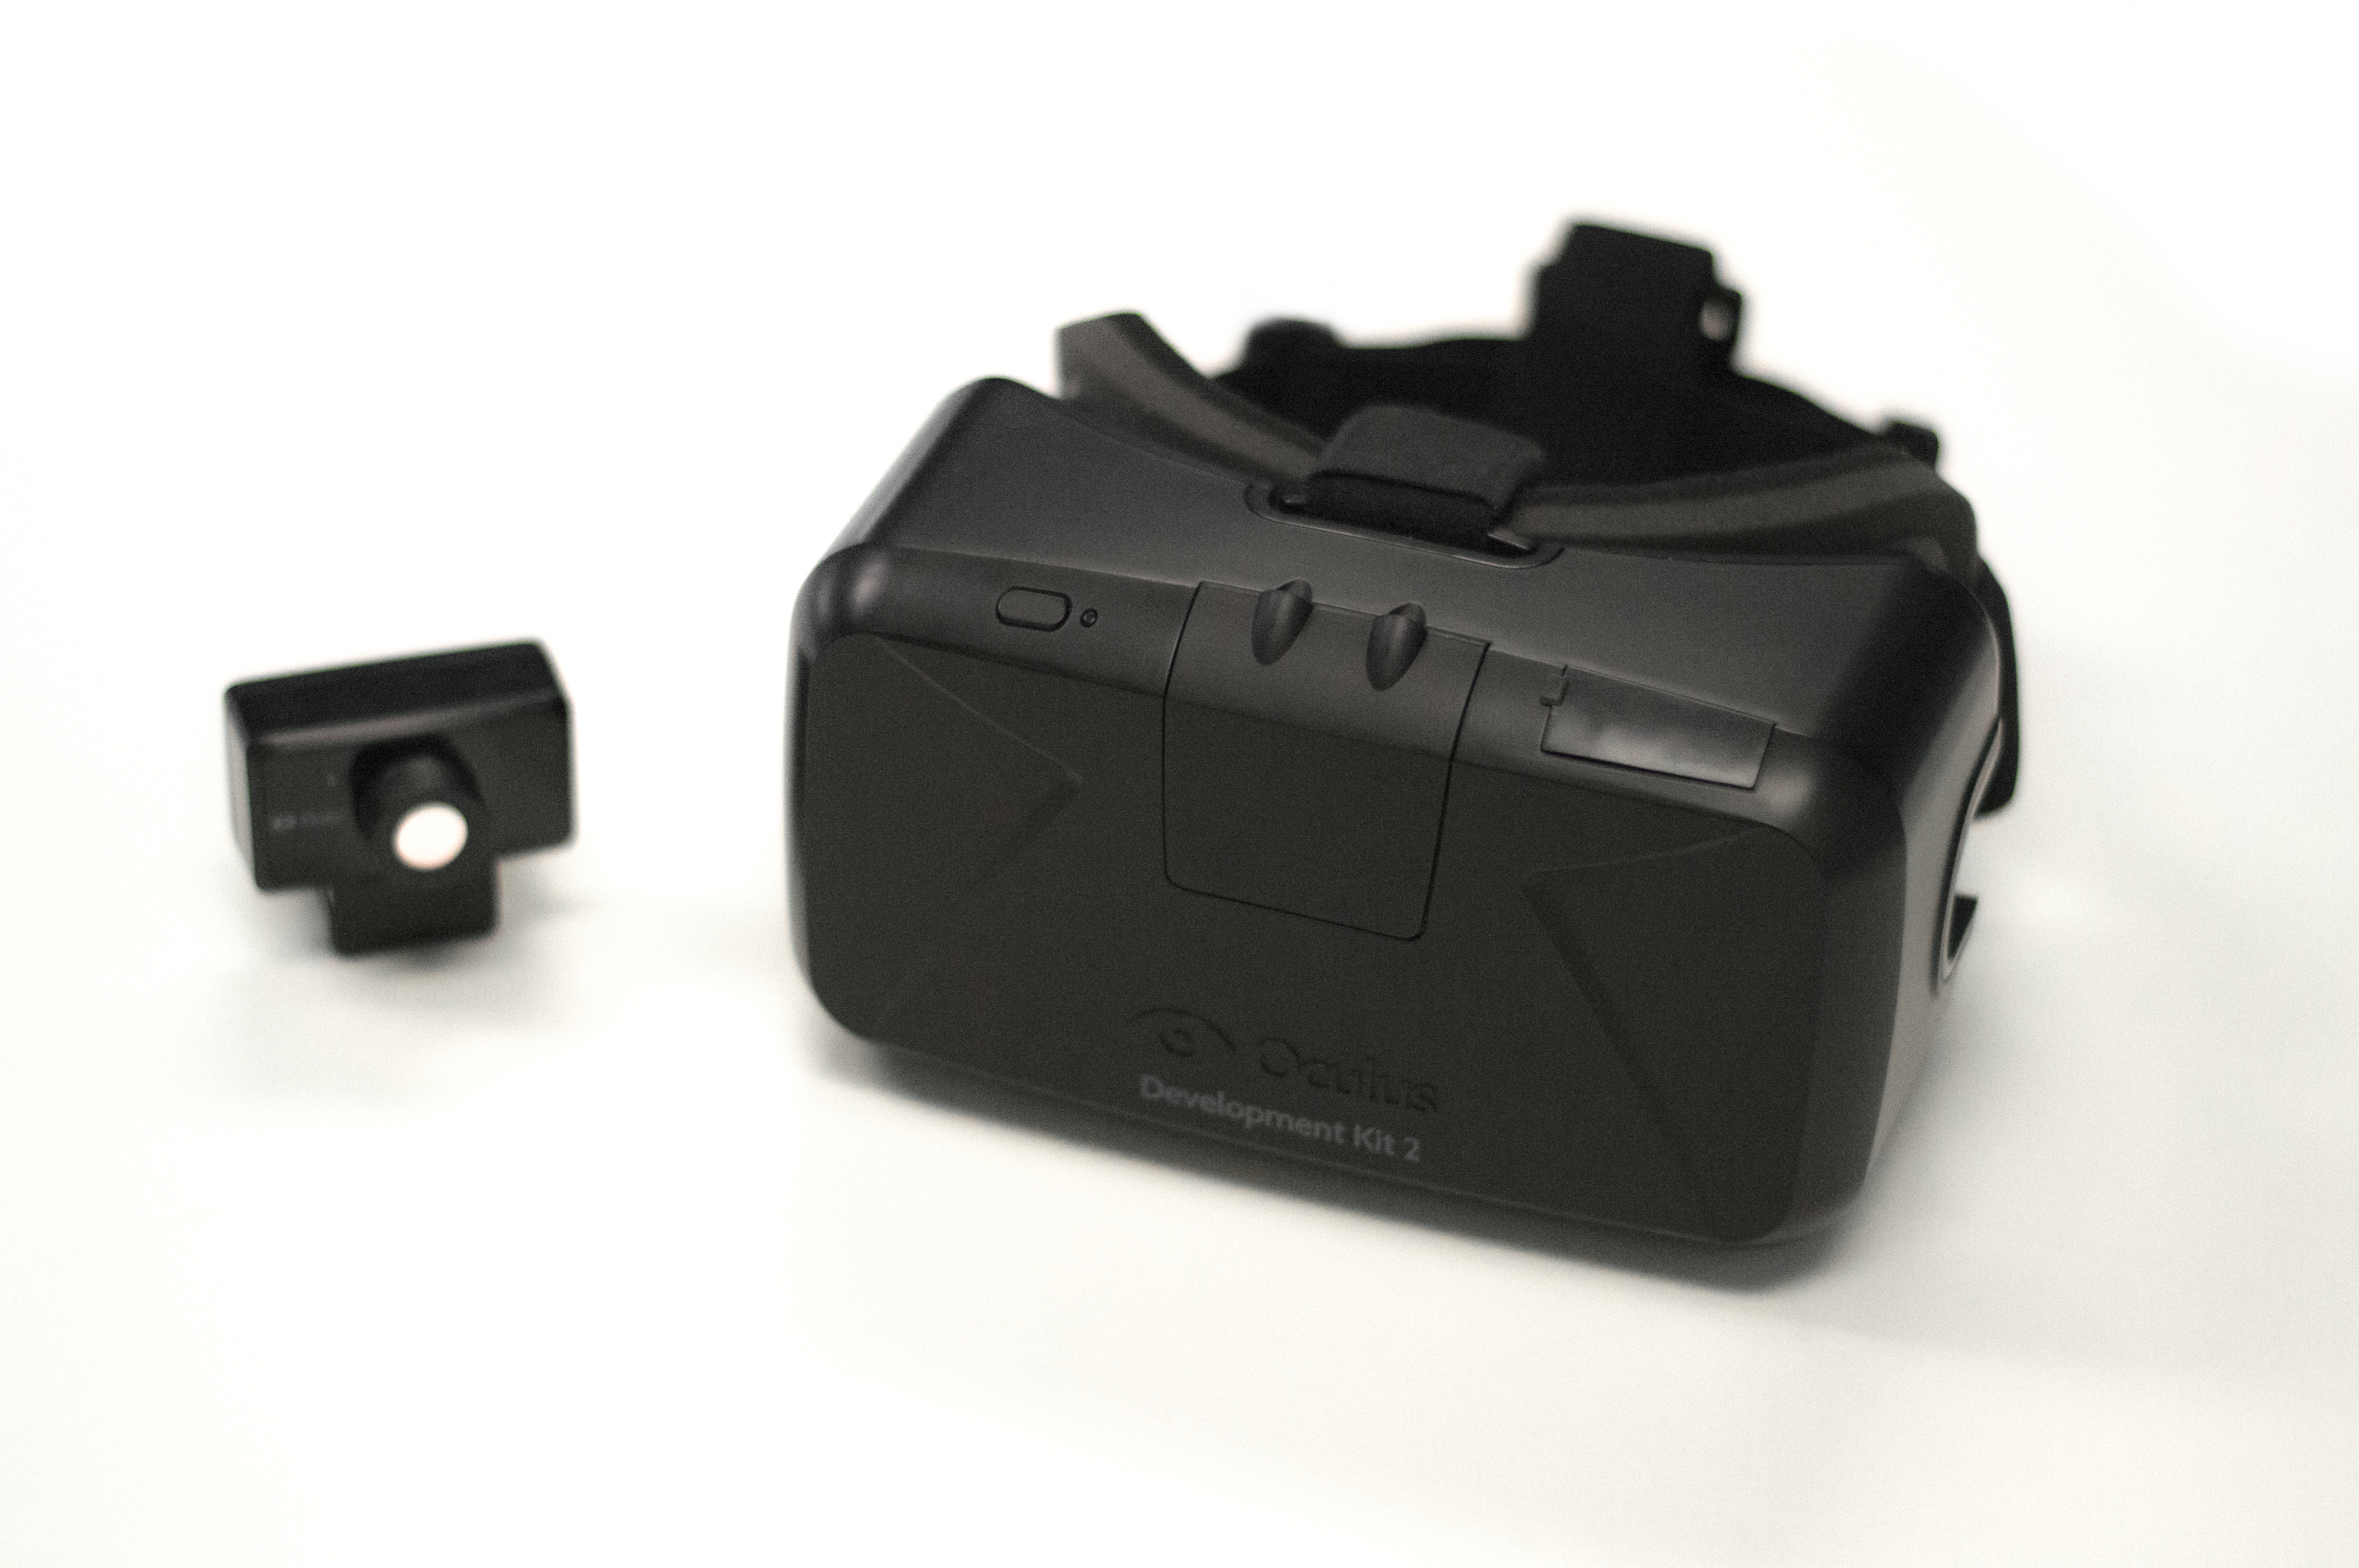 Oculus Rift Dev Kit 2 launches with 960×1080 resolution, latency | Ars Technica